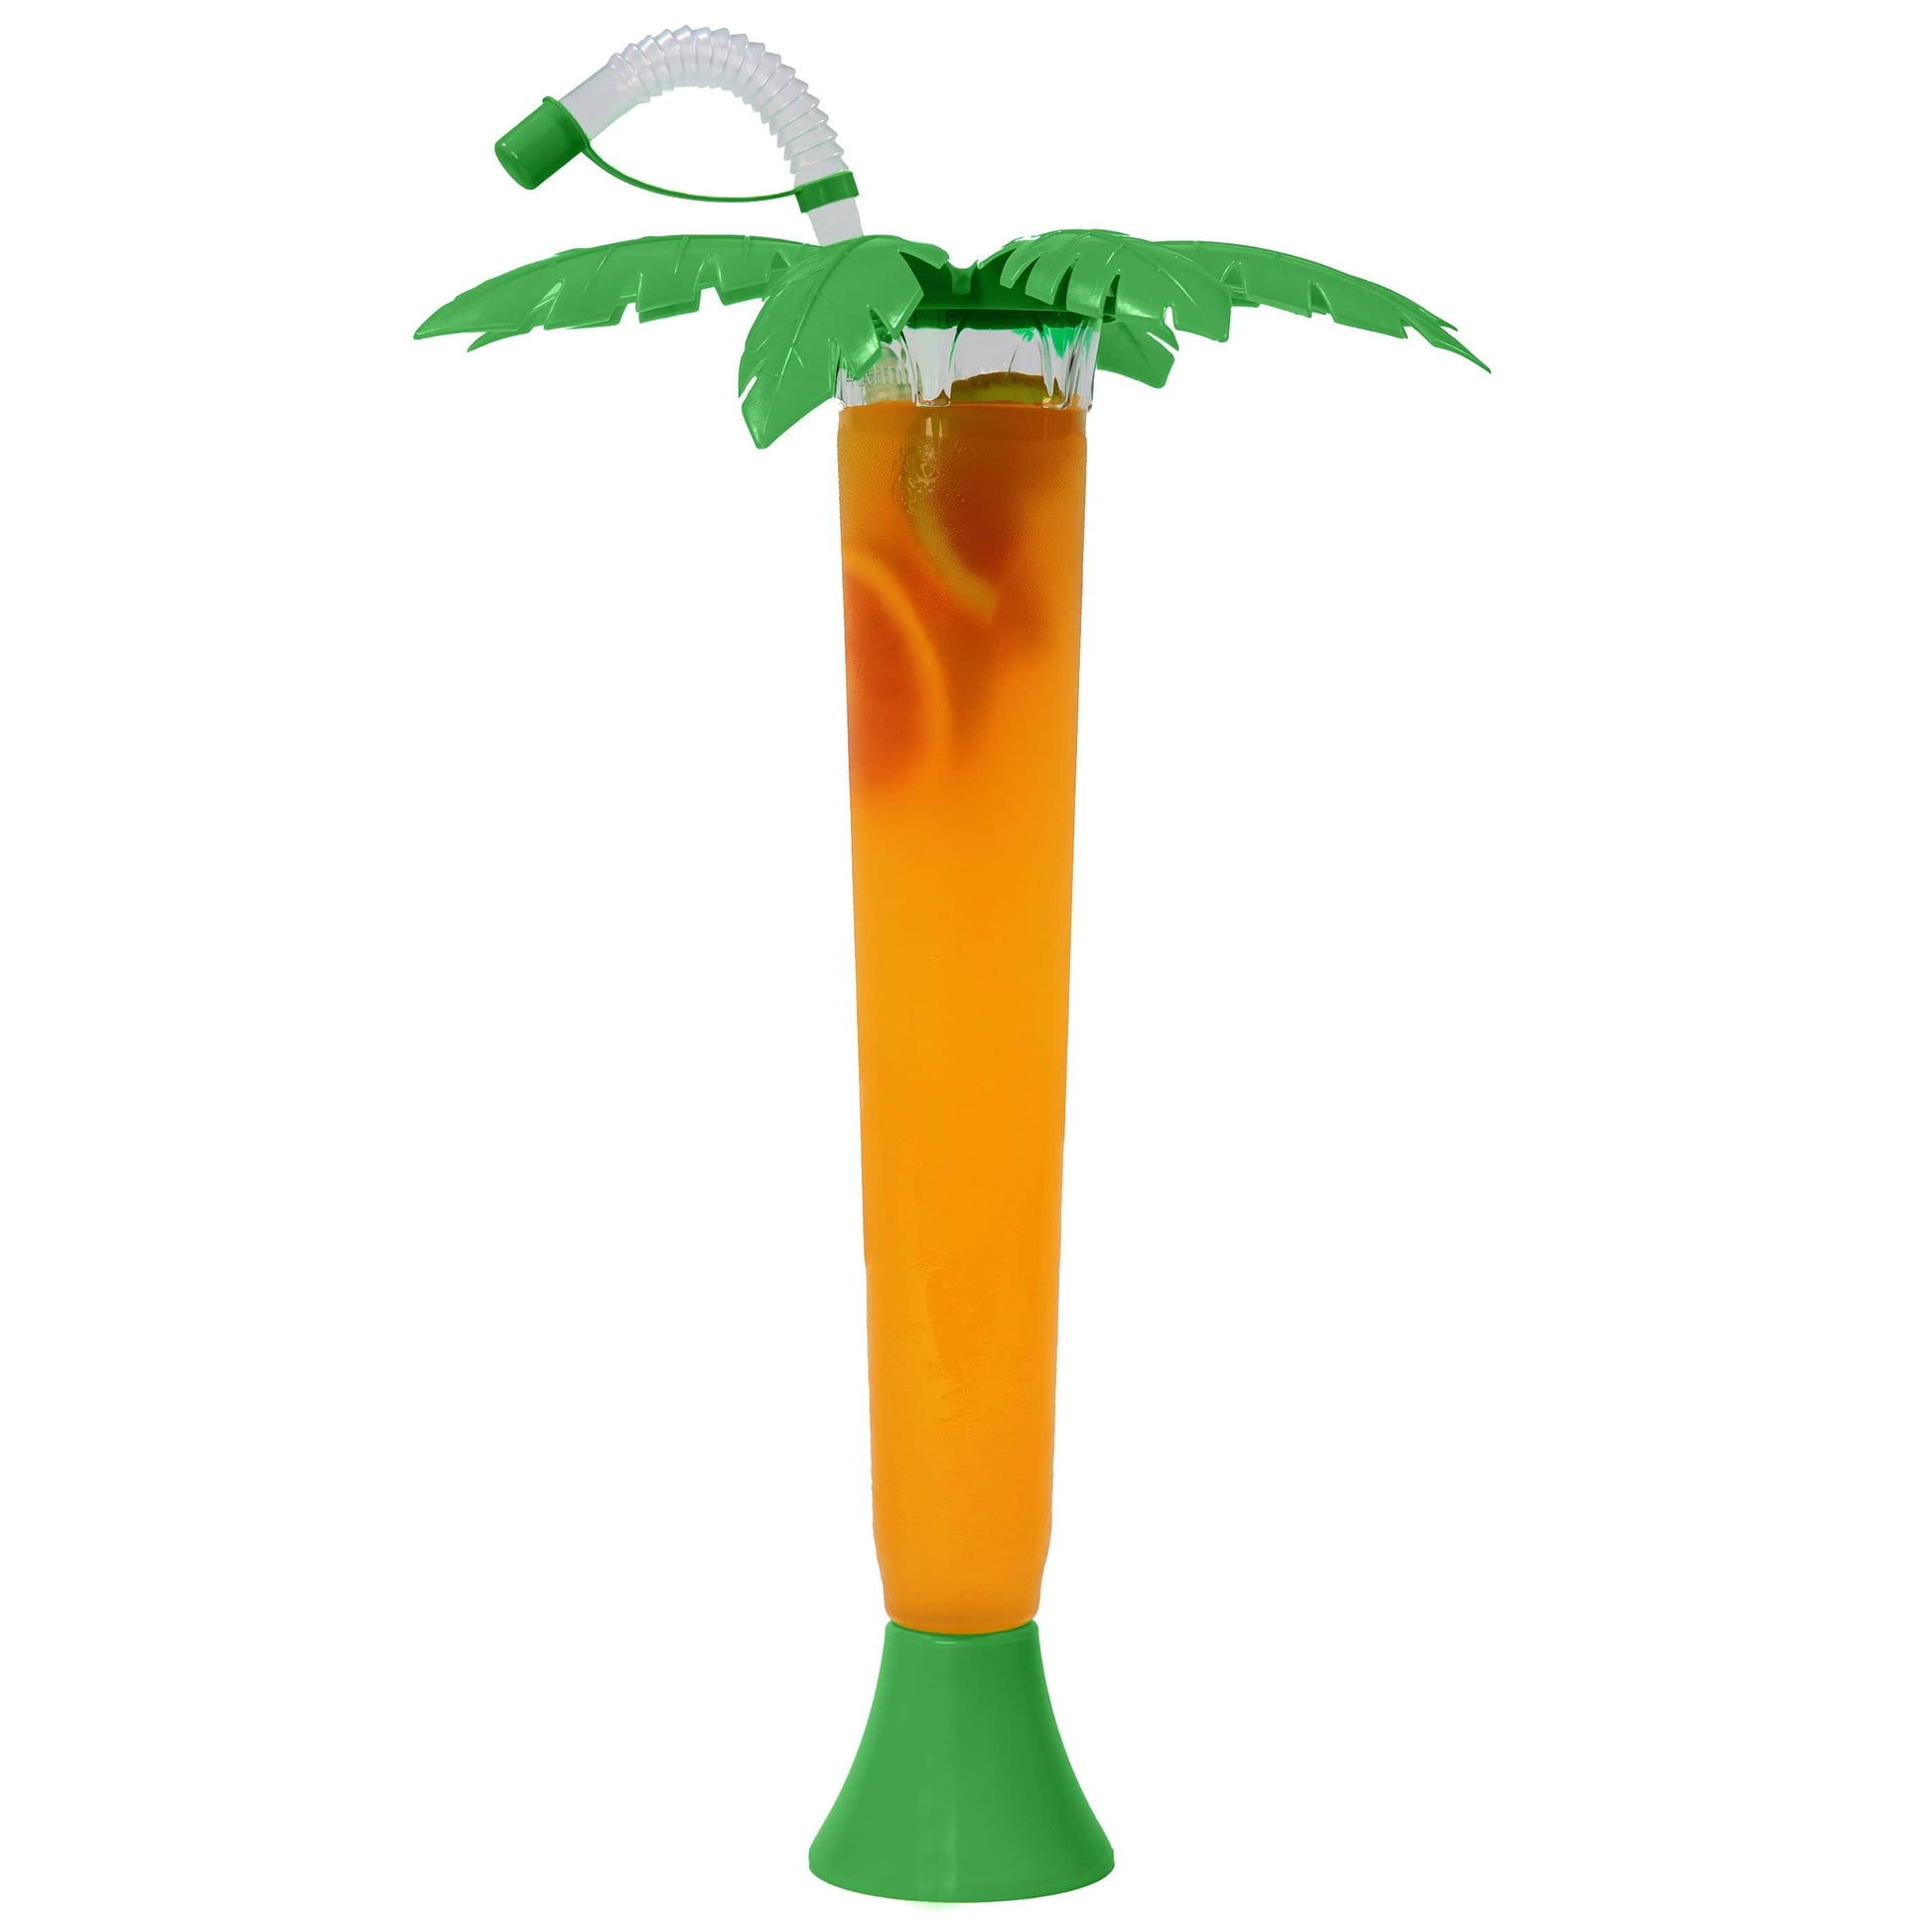 Sweet World USA Yard Cups 108 Palm Tree Luau Yard Cups (108 cups) - for Margaritas, Cold Drinks, Frozen Drinks, Kids Parties - 14 oz. (400 ml) - Green Palm cups with lids and straws